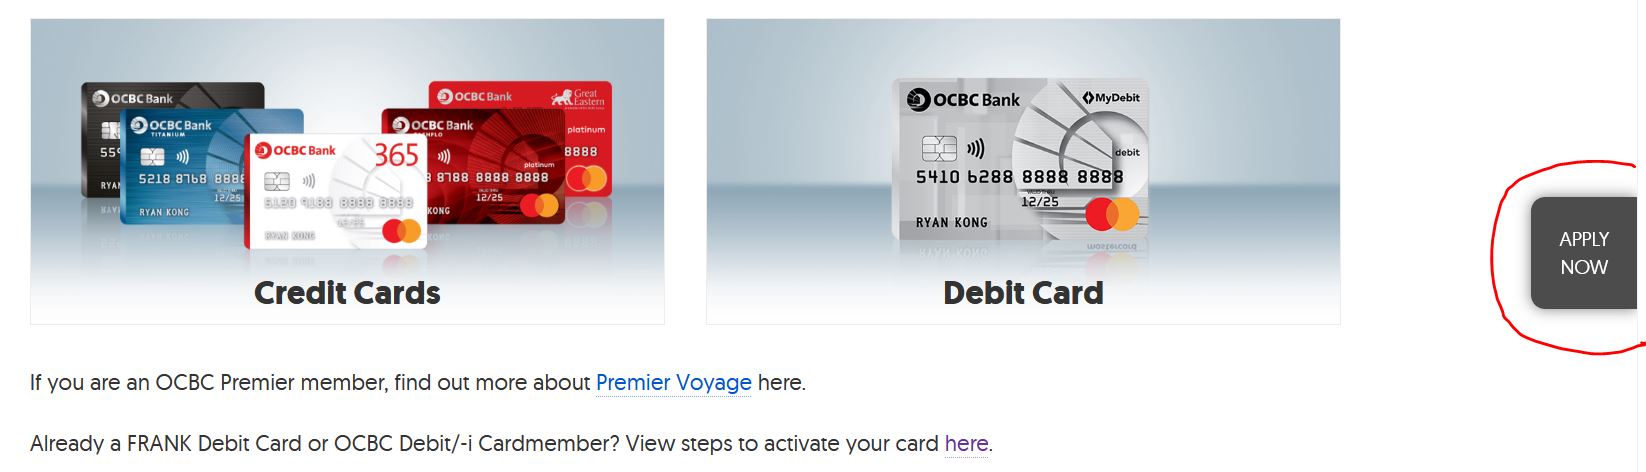 How to Apply OCBC Credit Card via Internet Banking